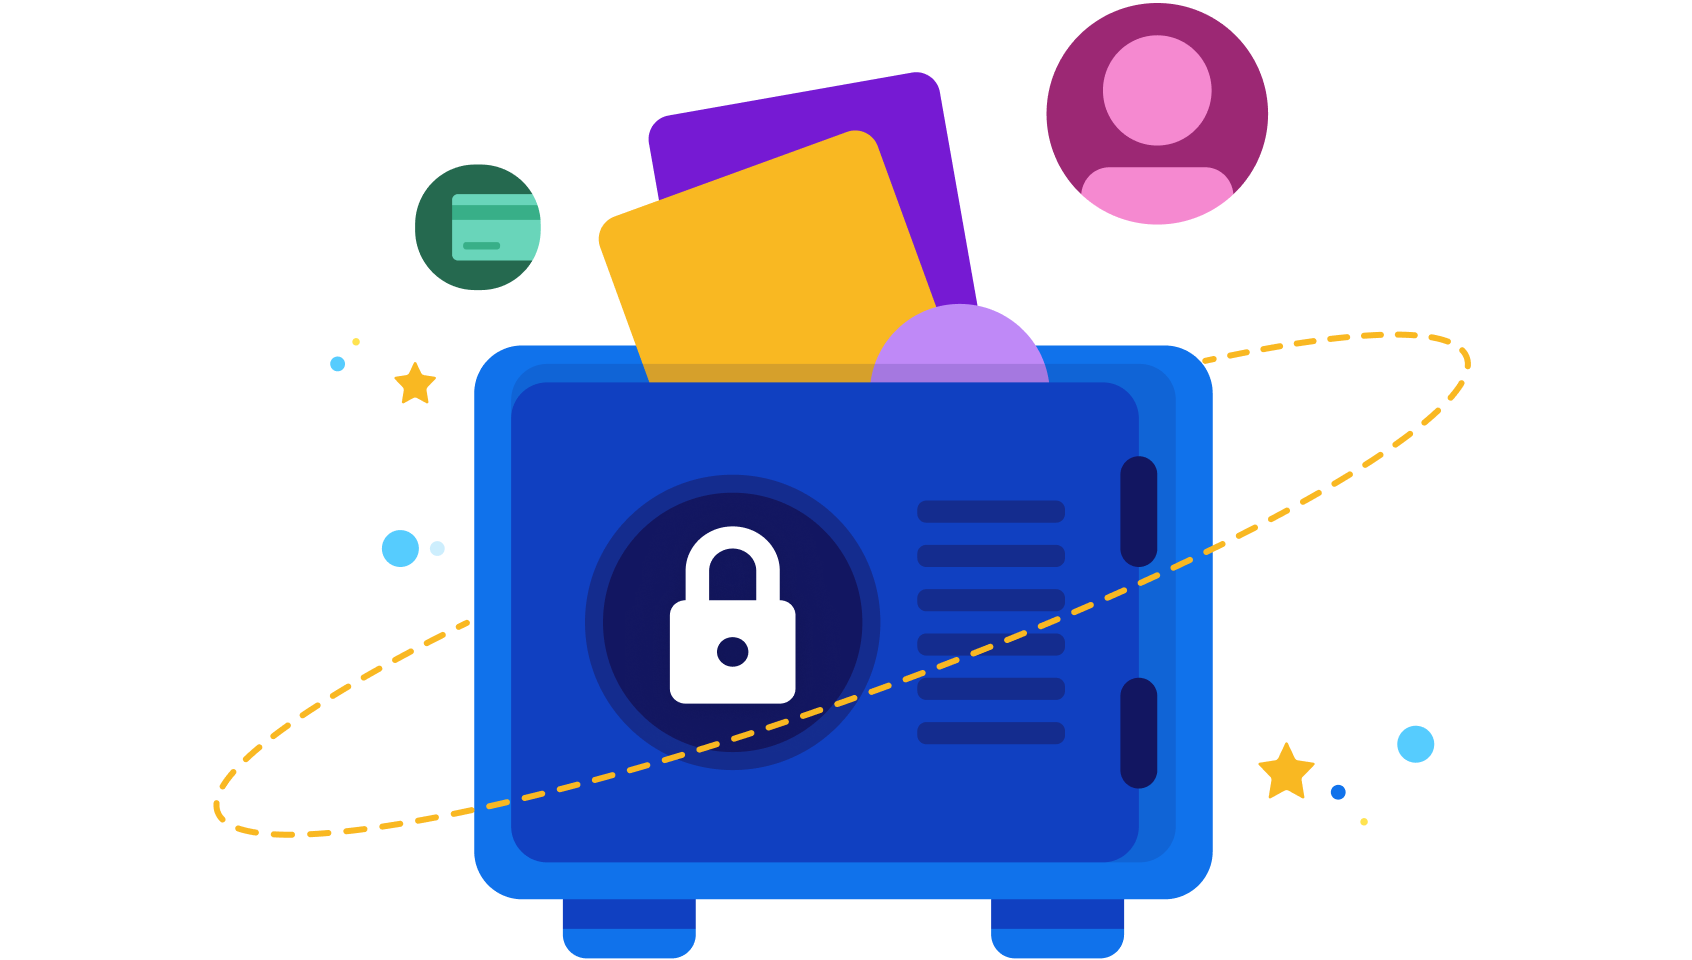 An illustration of a safe and documents that represent personal info that will be secured inside it